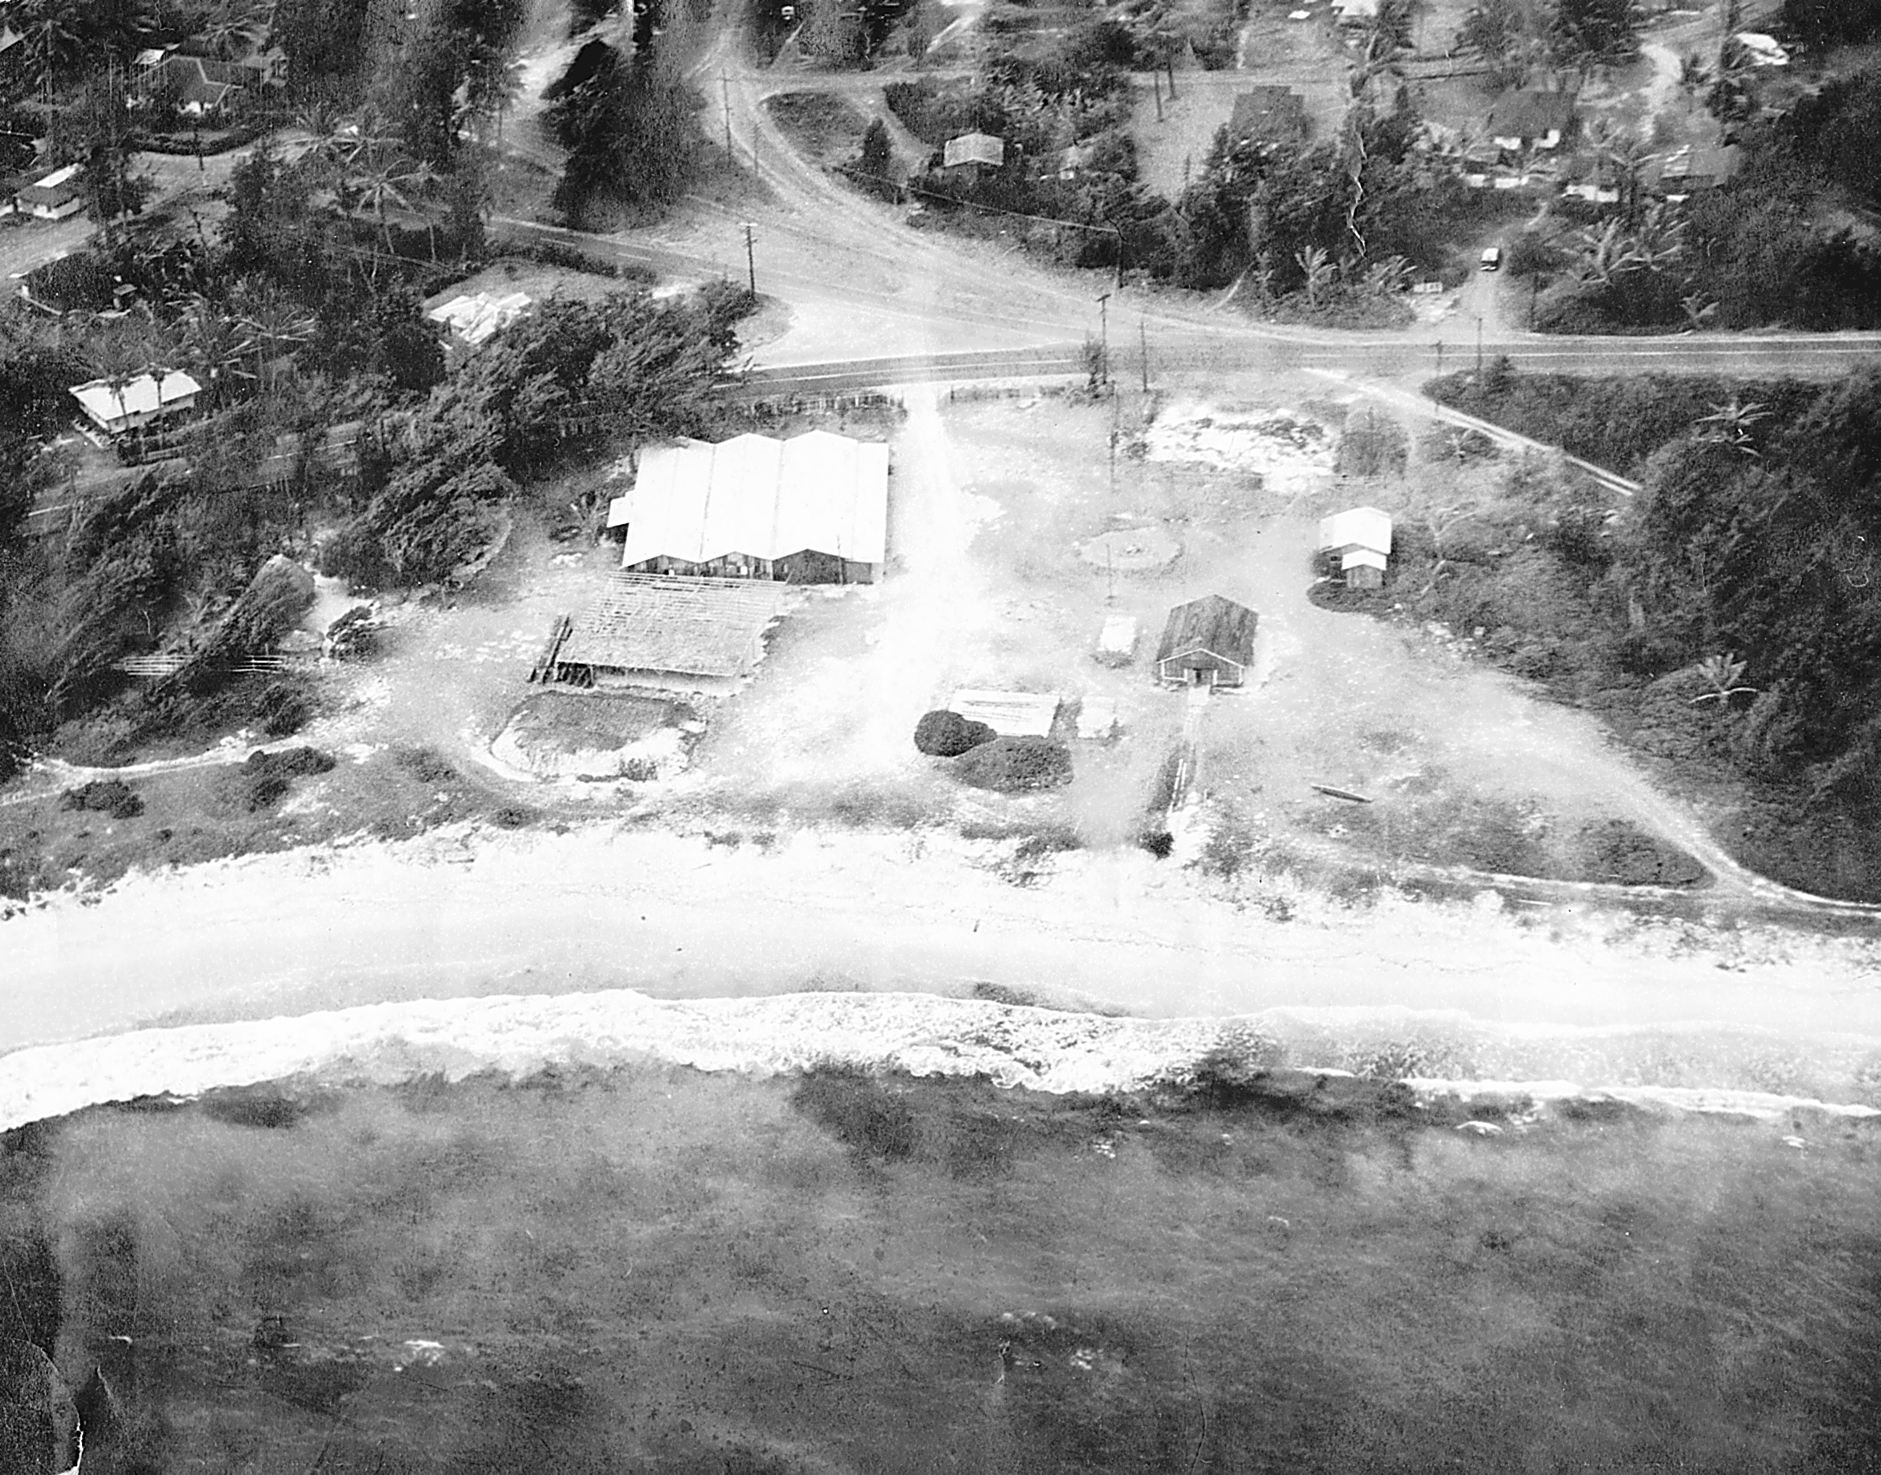 Laie Beach (later named Hukilau Beach) showing the bakery, the various boat houses and Kamehameha Hwy. Courtesy of BYUH Archives and Special Collections